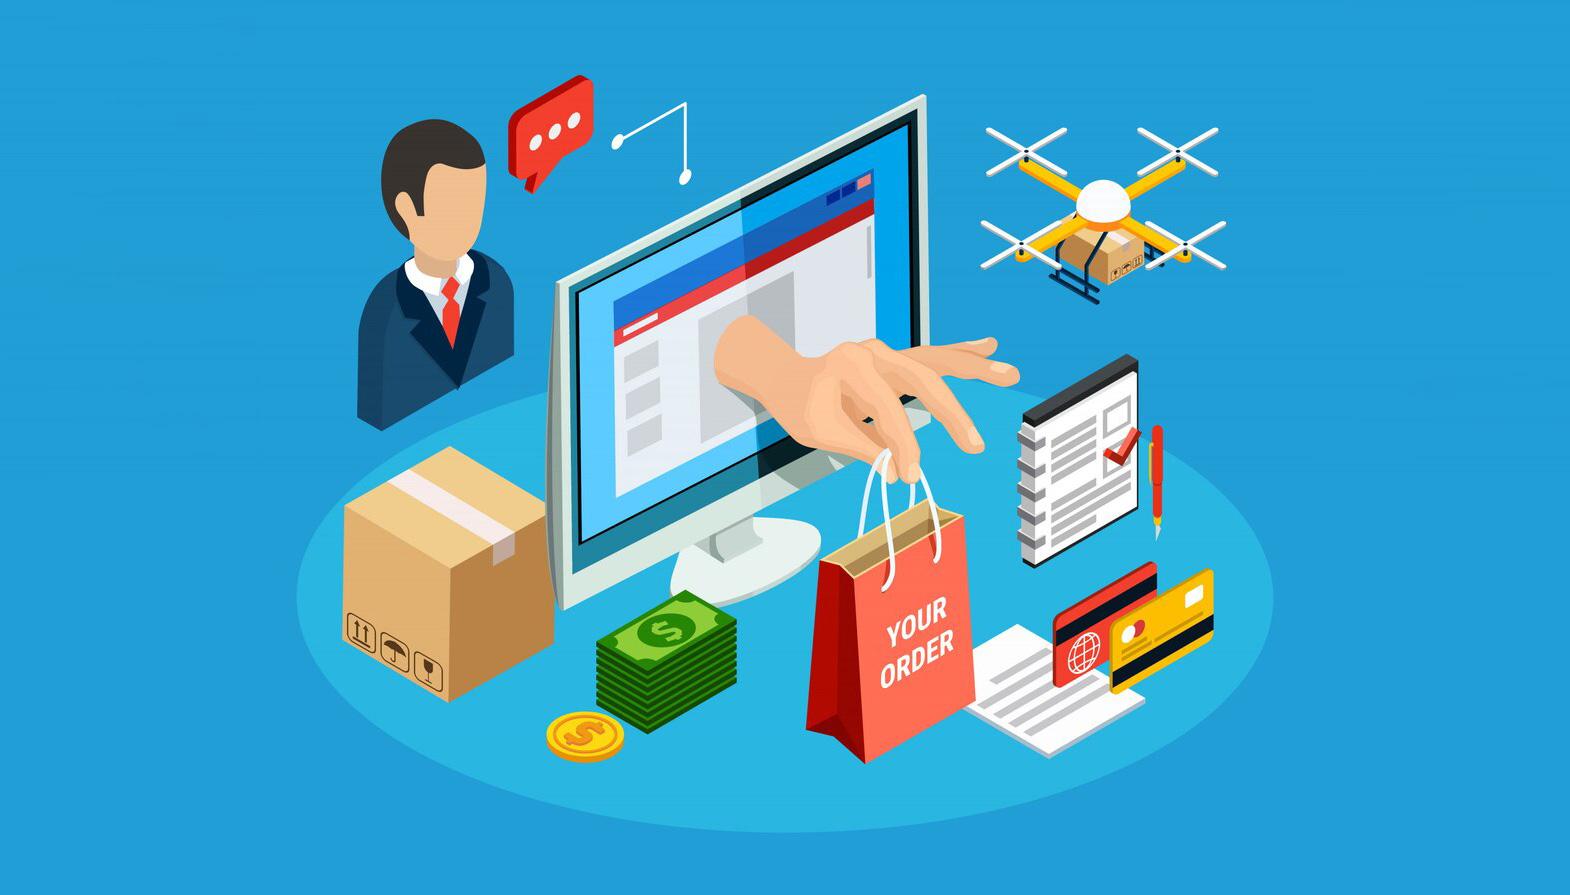 Logistics with online delivery service 3d isometric illustration